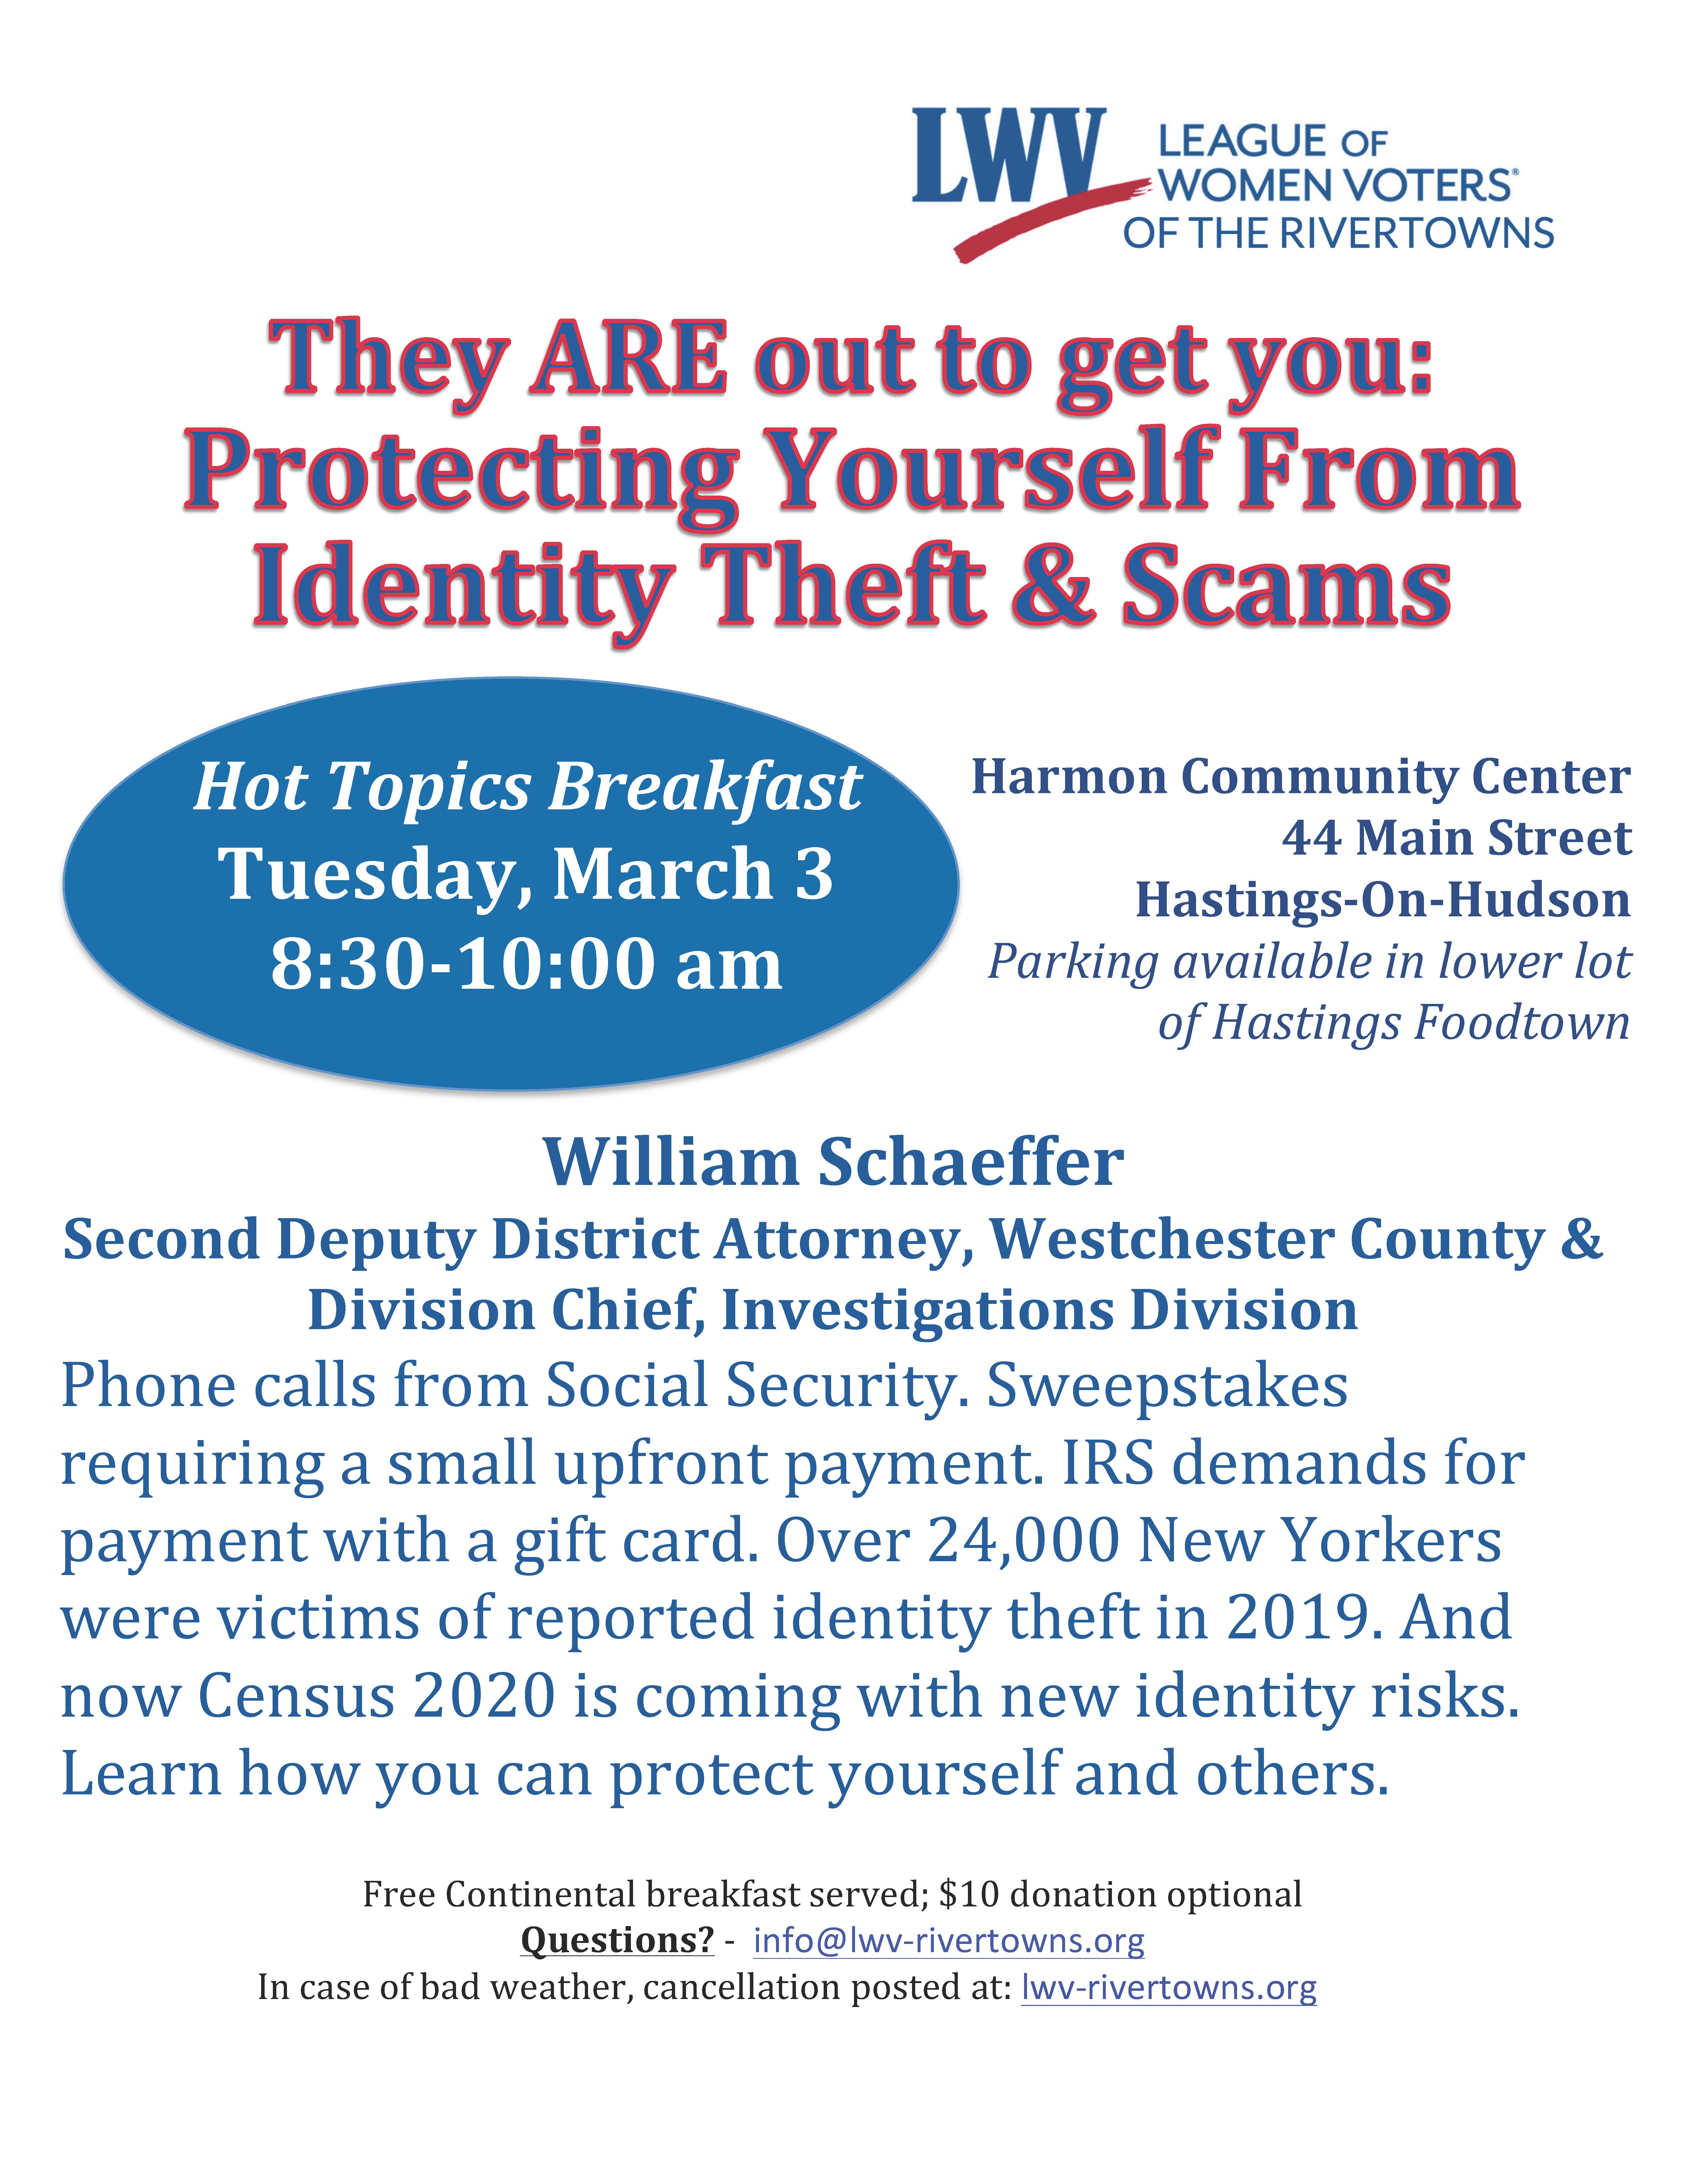 Hot Topics Breakfast: Protecting Yourself from Identity Theft and Scams